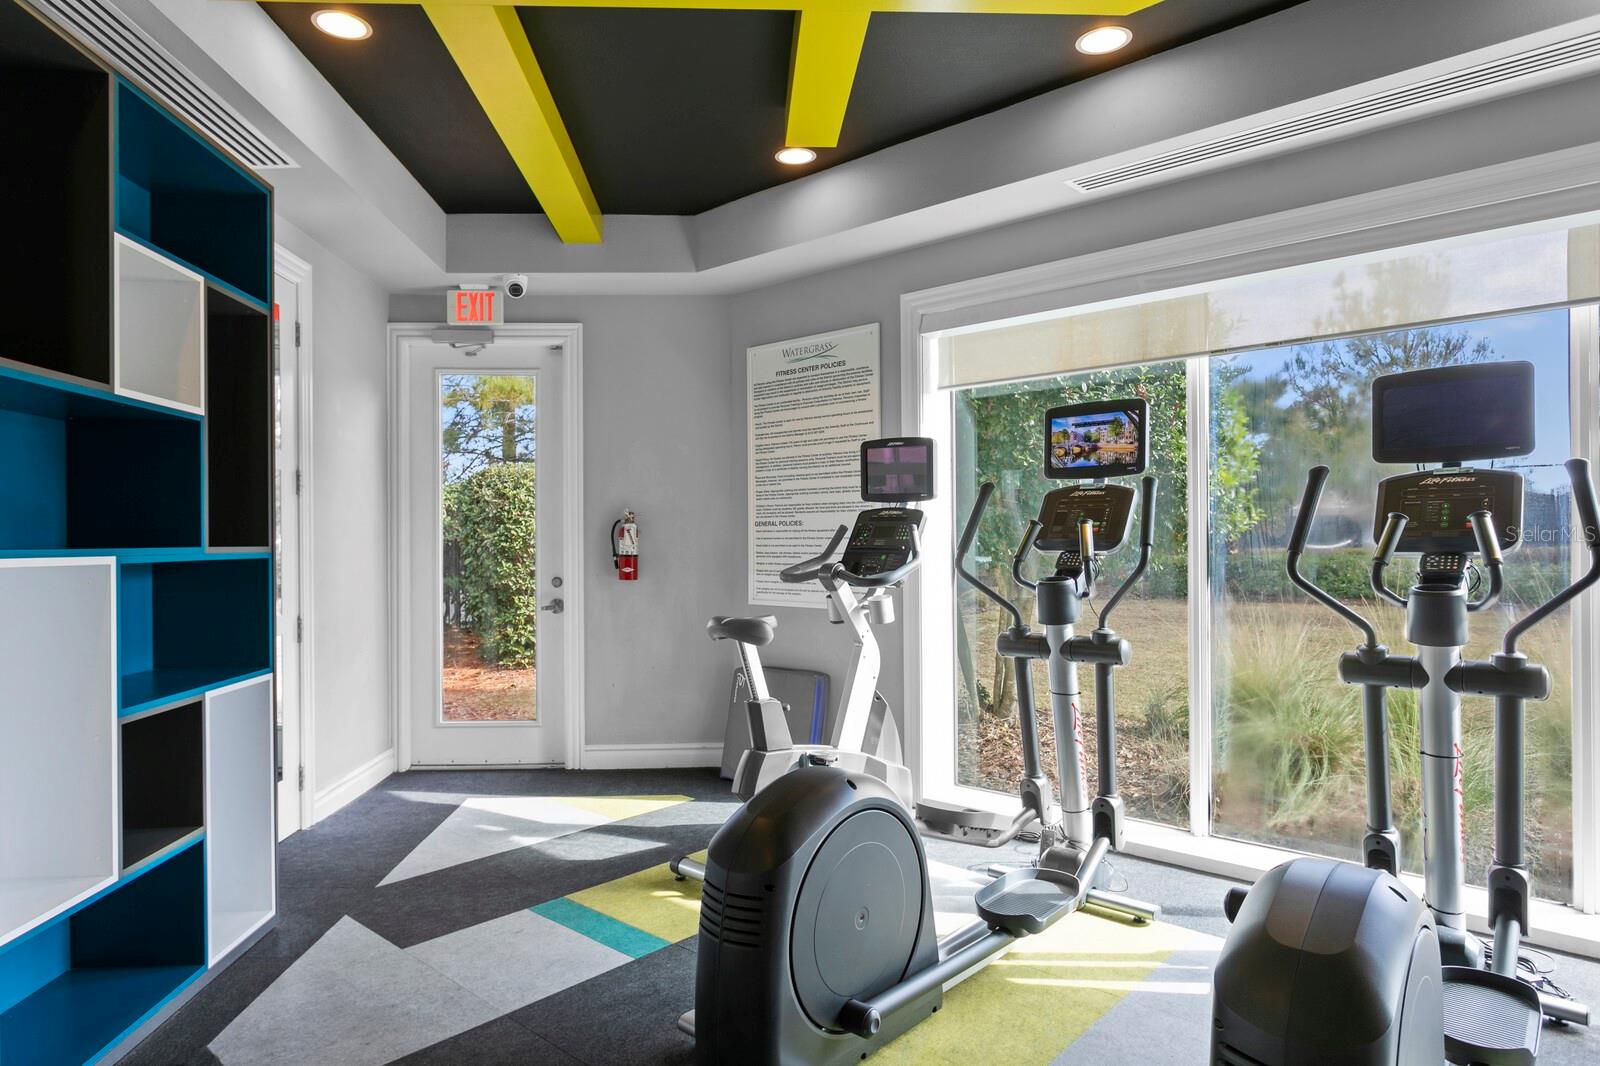 Fitness center with full bathroom and shower.